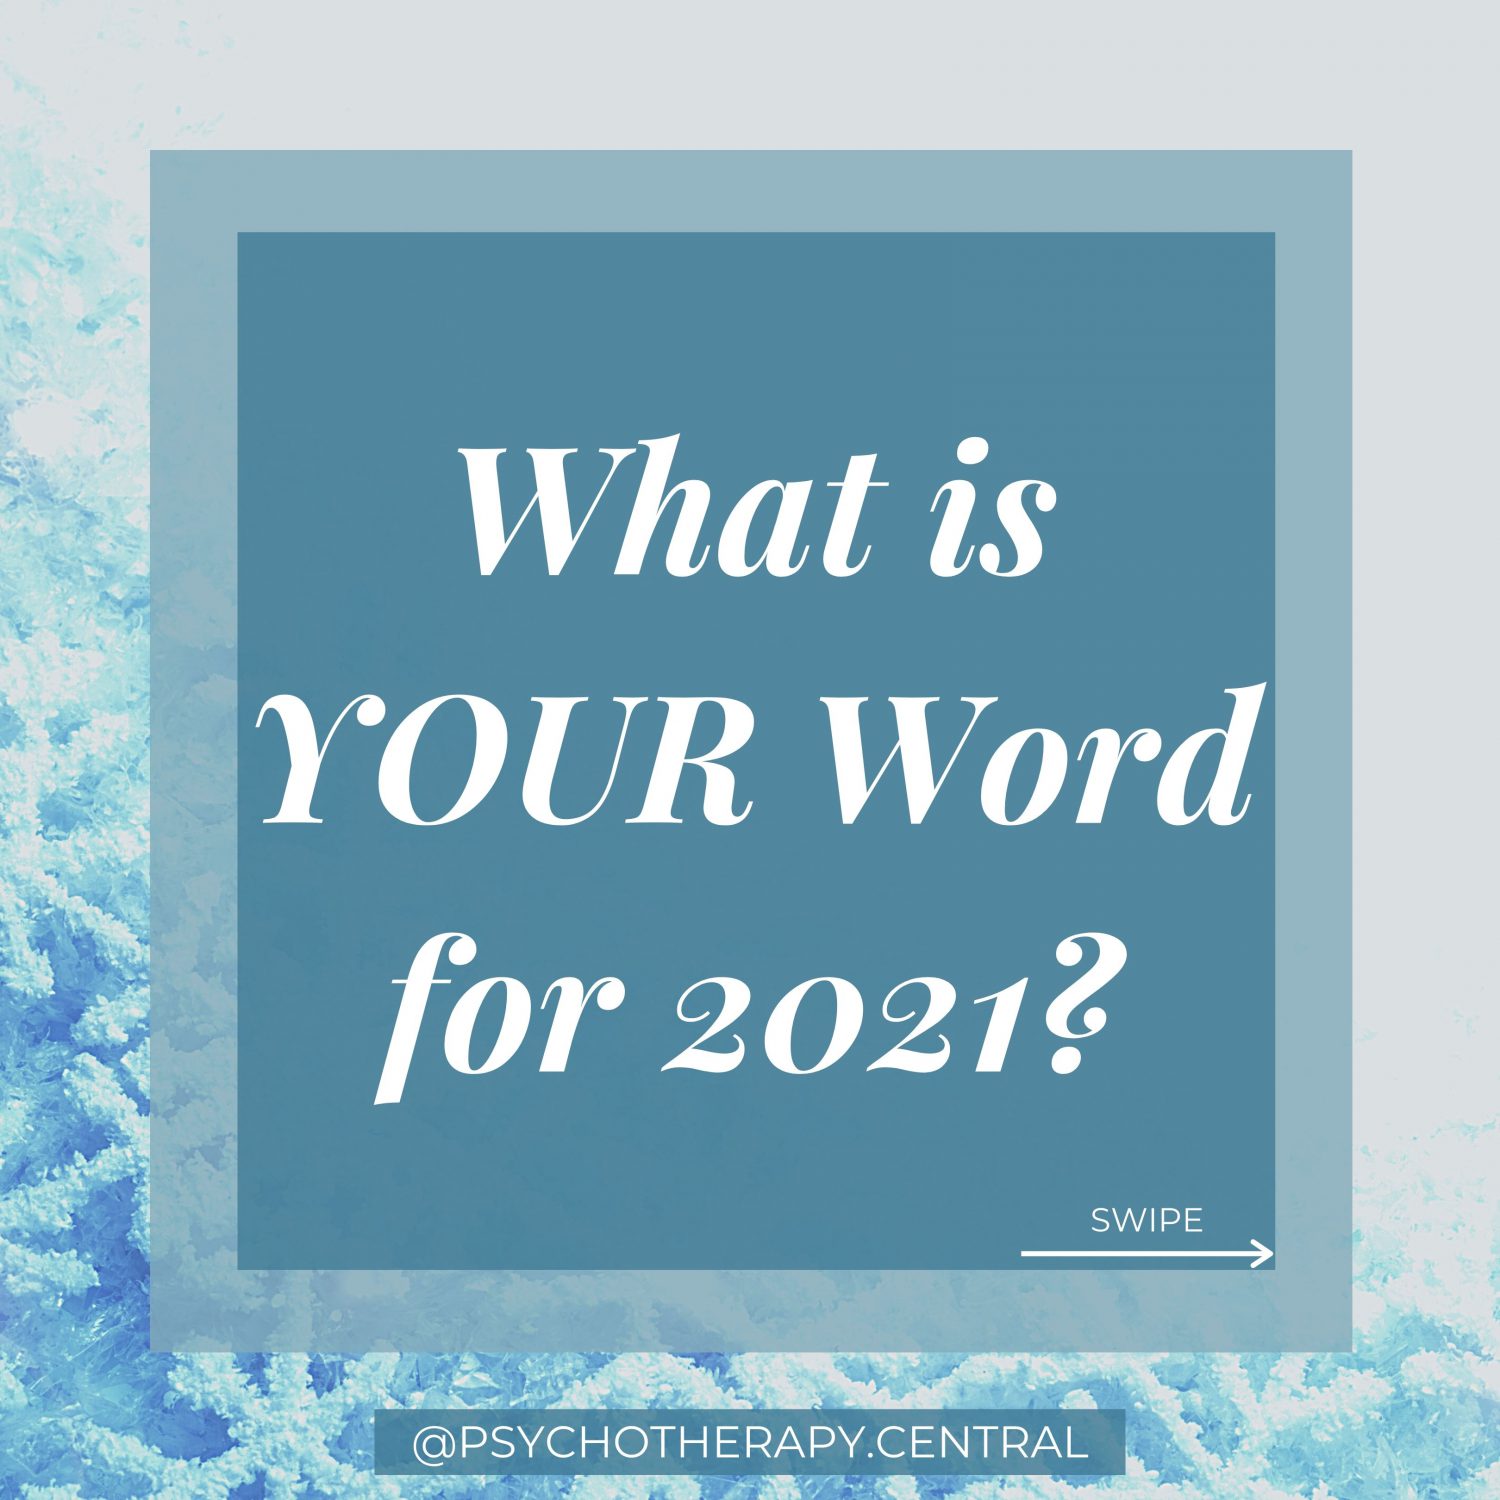 what is your word for 2021?